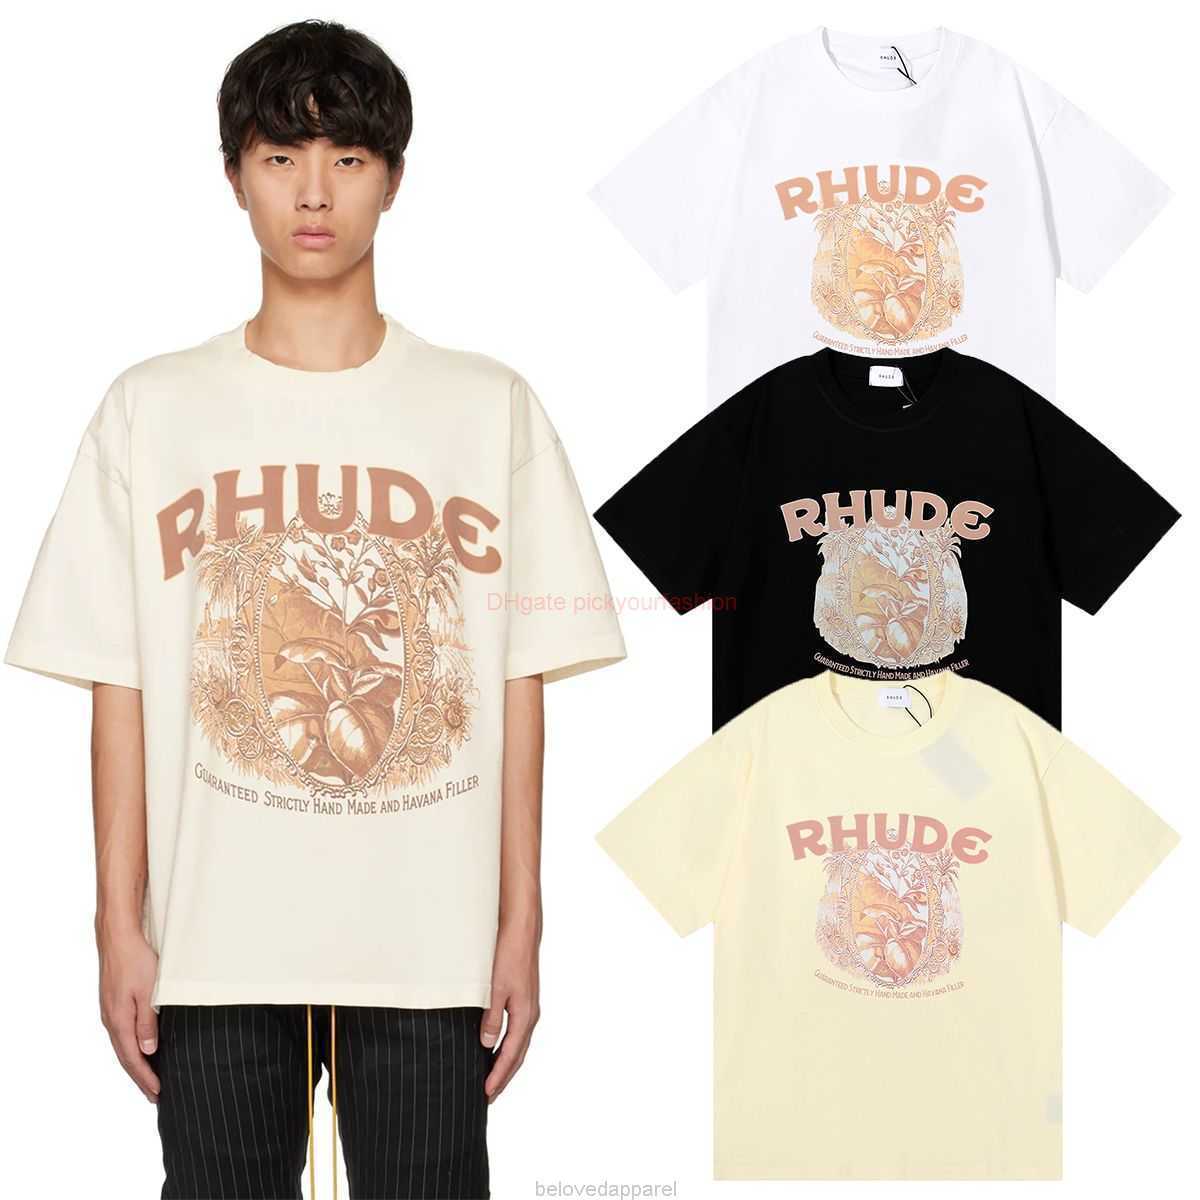 

Designer Fashion Clothing Tees Tshirt Rhude Herbal Plant Simple Color Printing High Weight Double Yarn Pure Cotton Casual Short Sleeve Tshirt for Men Women Cotton St, White fh5052